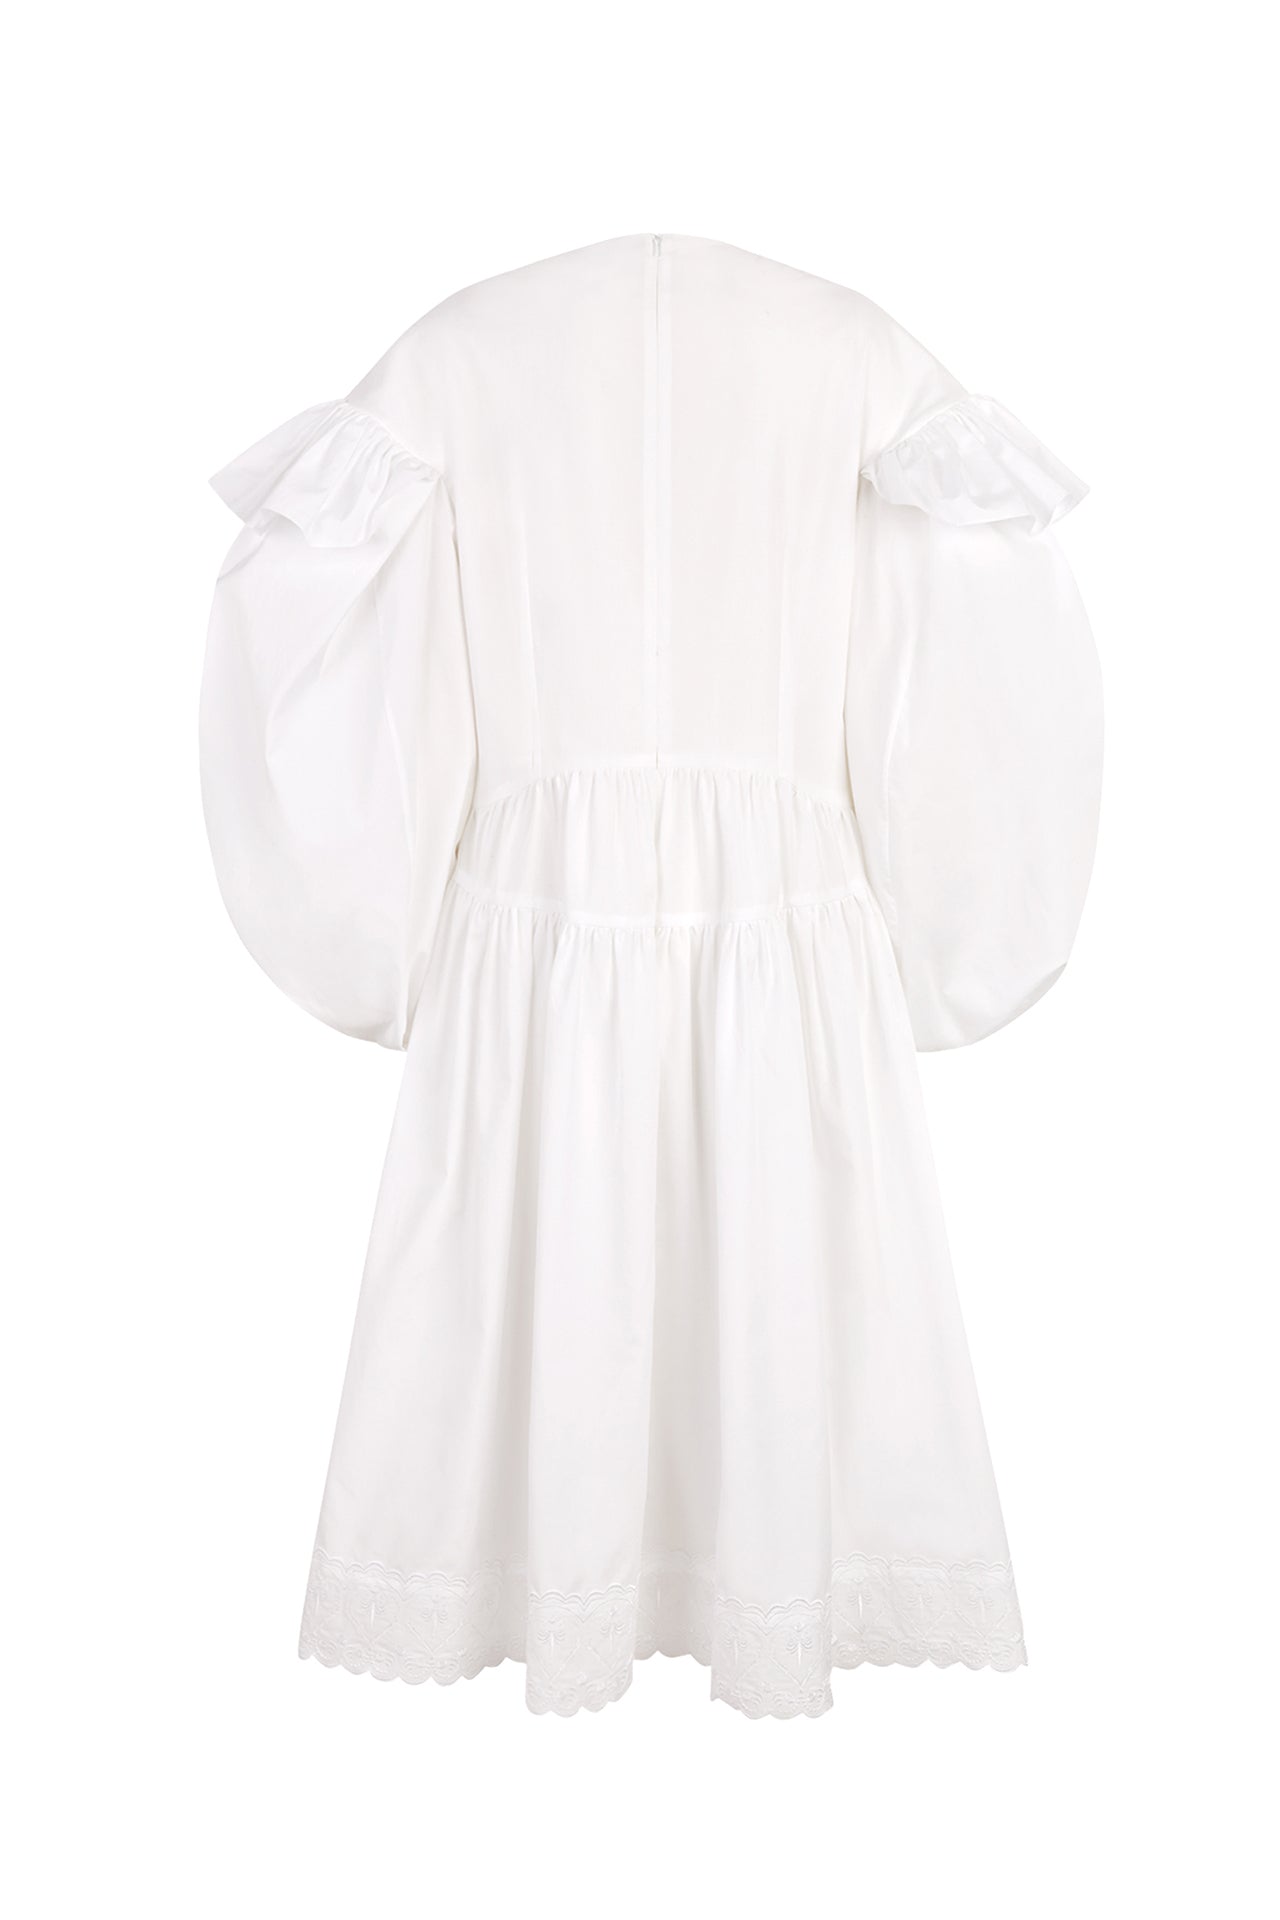 White Signature Sleeve Smock Dress with Heart Trim